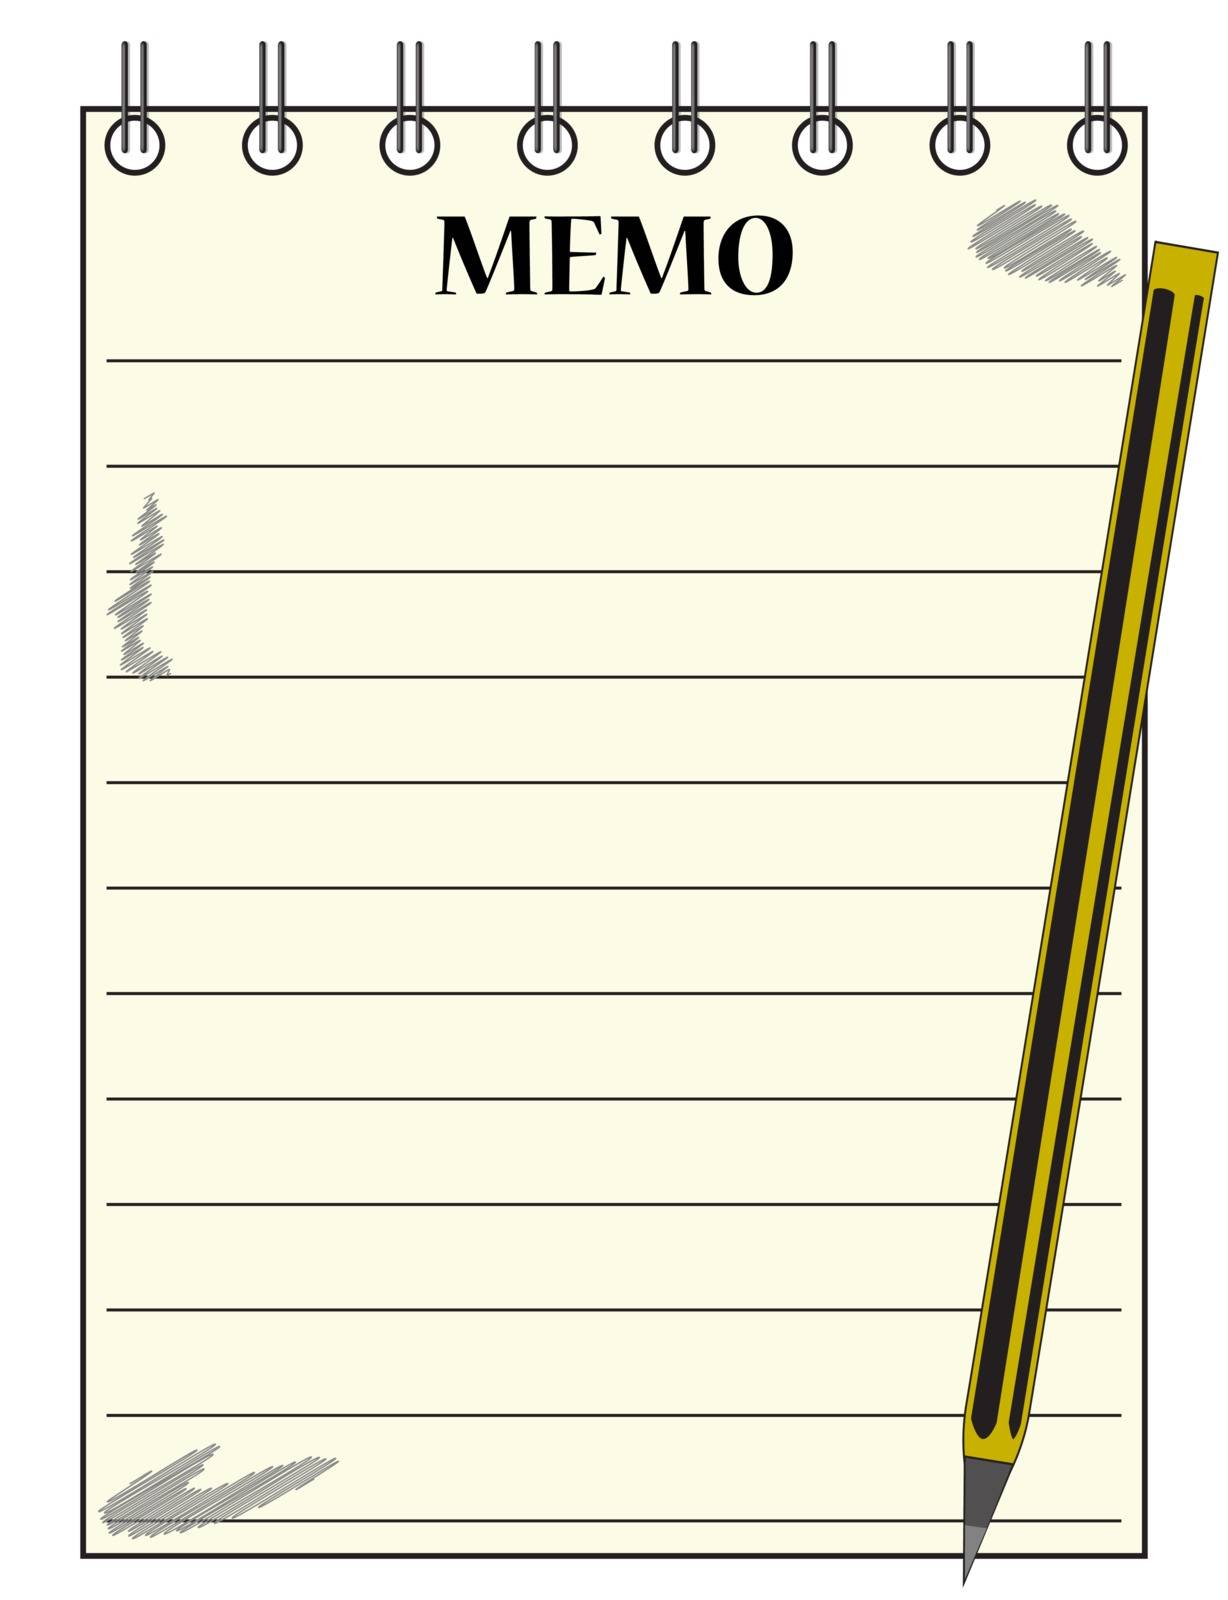 A lined memo blank notepad template or background with a pencil isolated on a white background